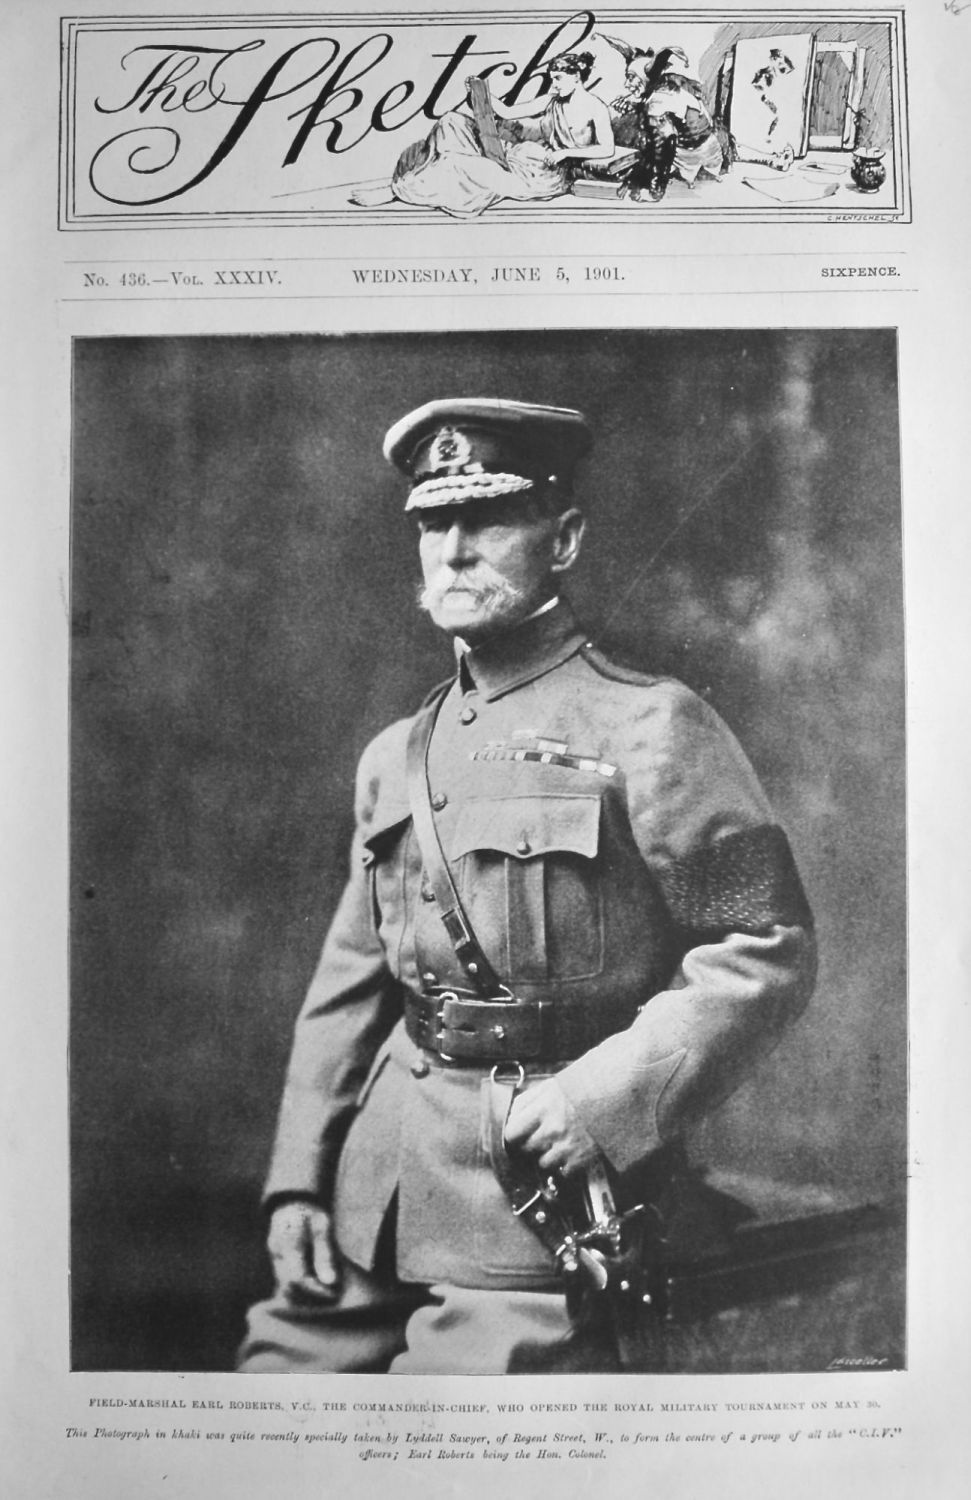 Field-Marshal Earl Roberts, V.C. The Commander-in-Chief, who opened the Roy